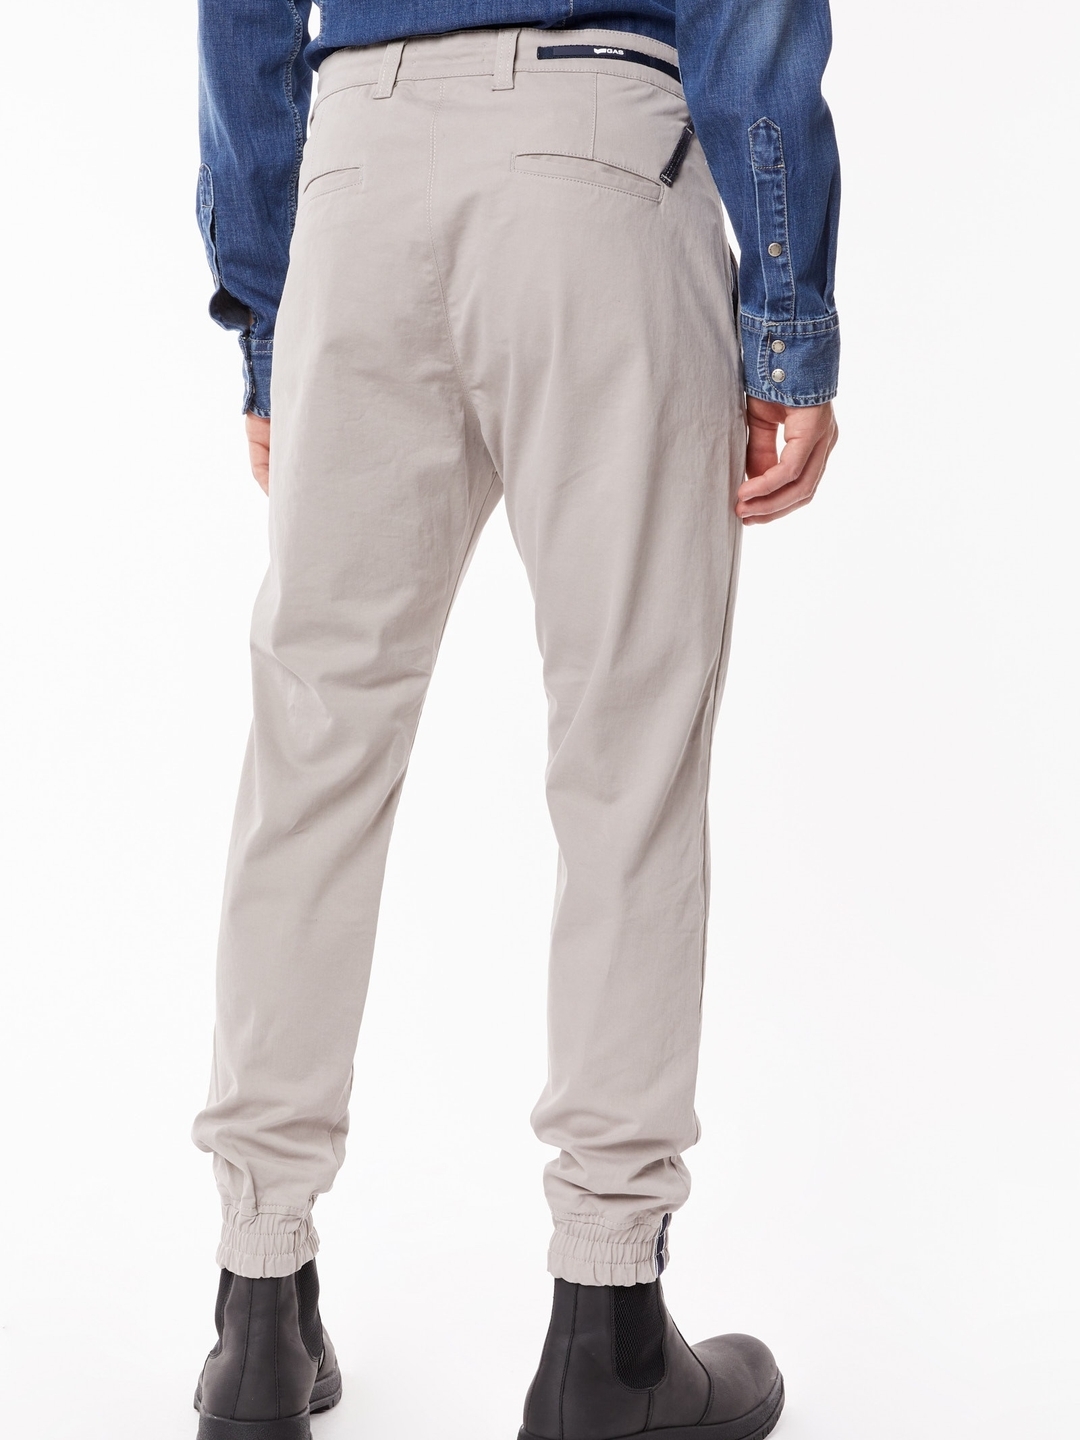 Tapered Fit Pants In Hickory-anthinhphatland.vn